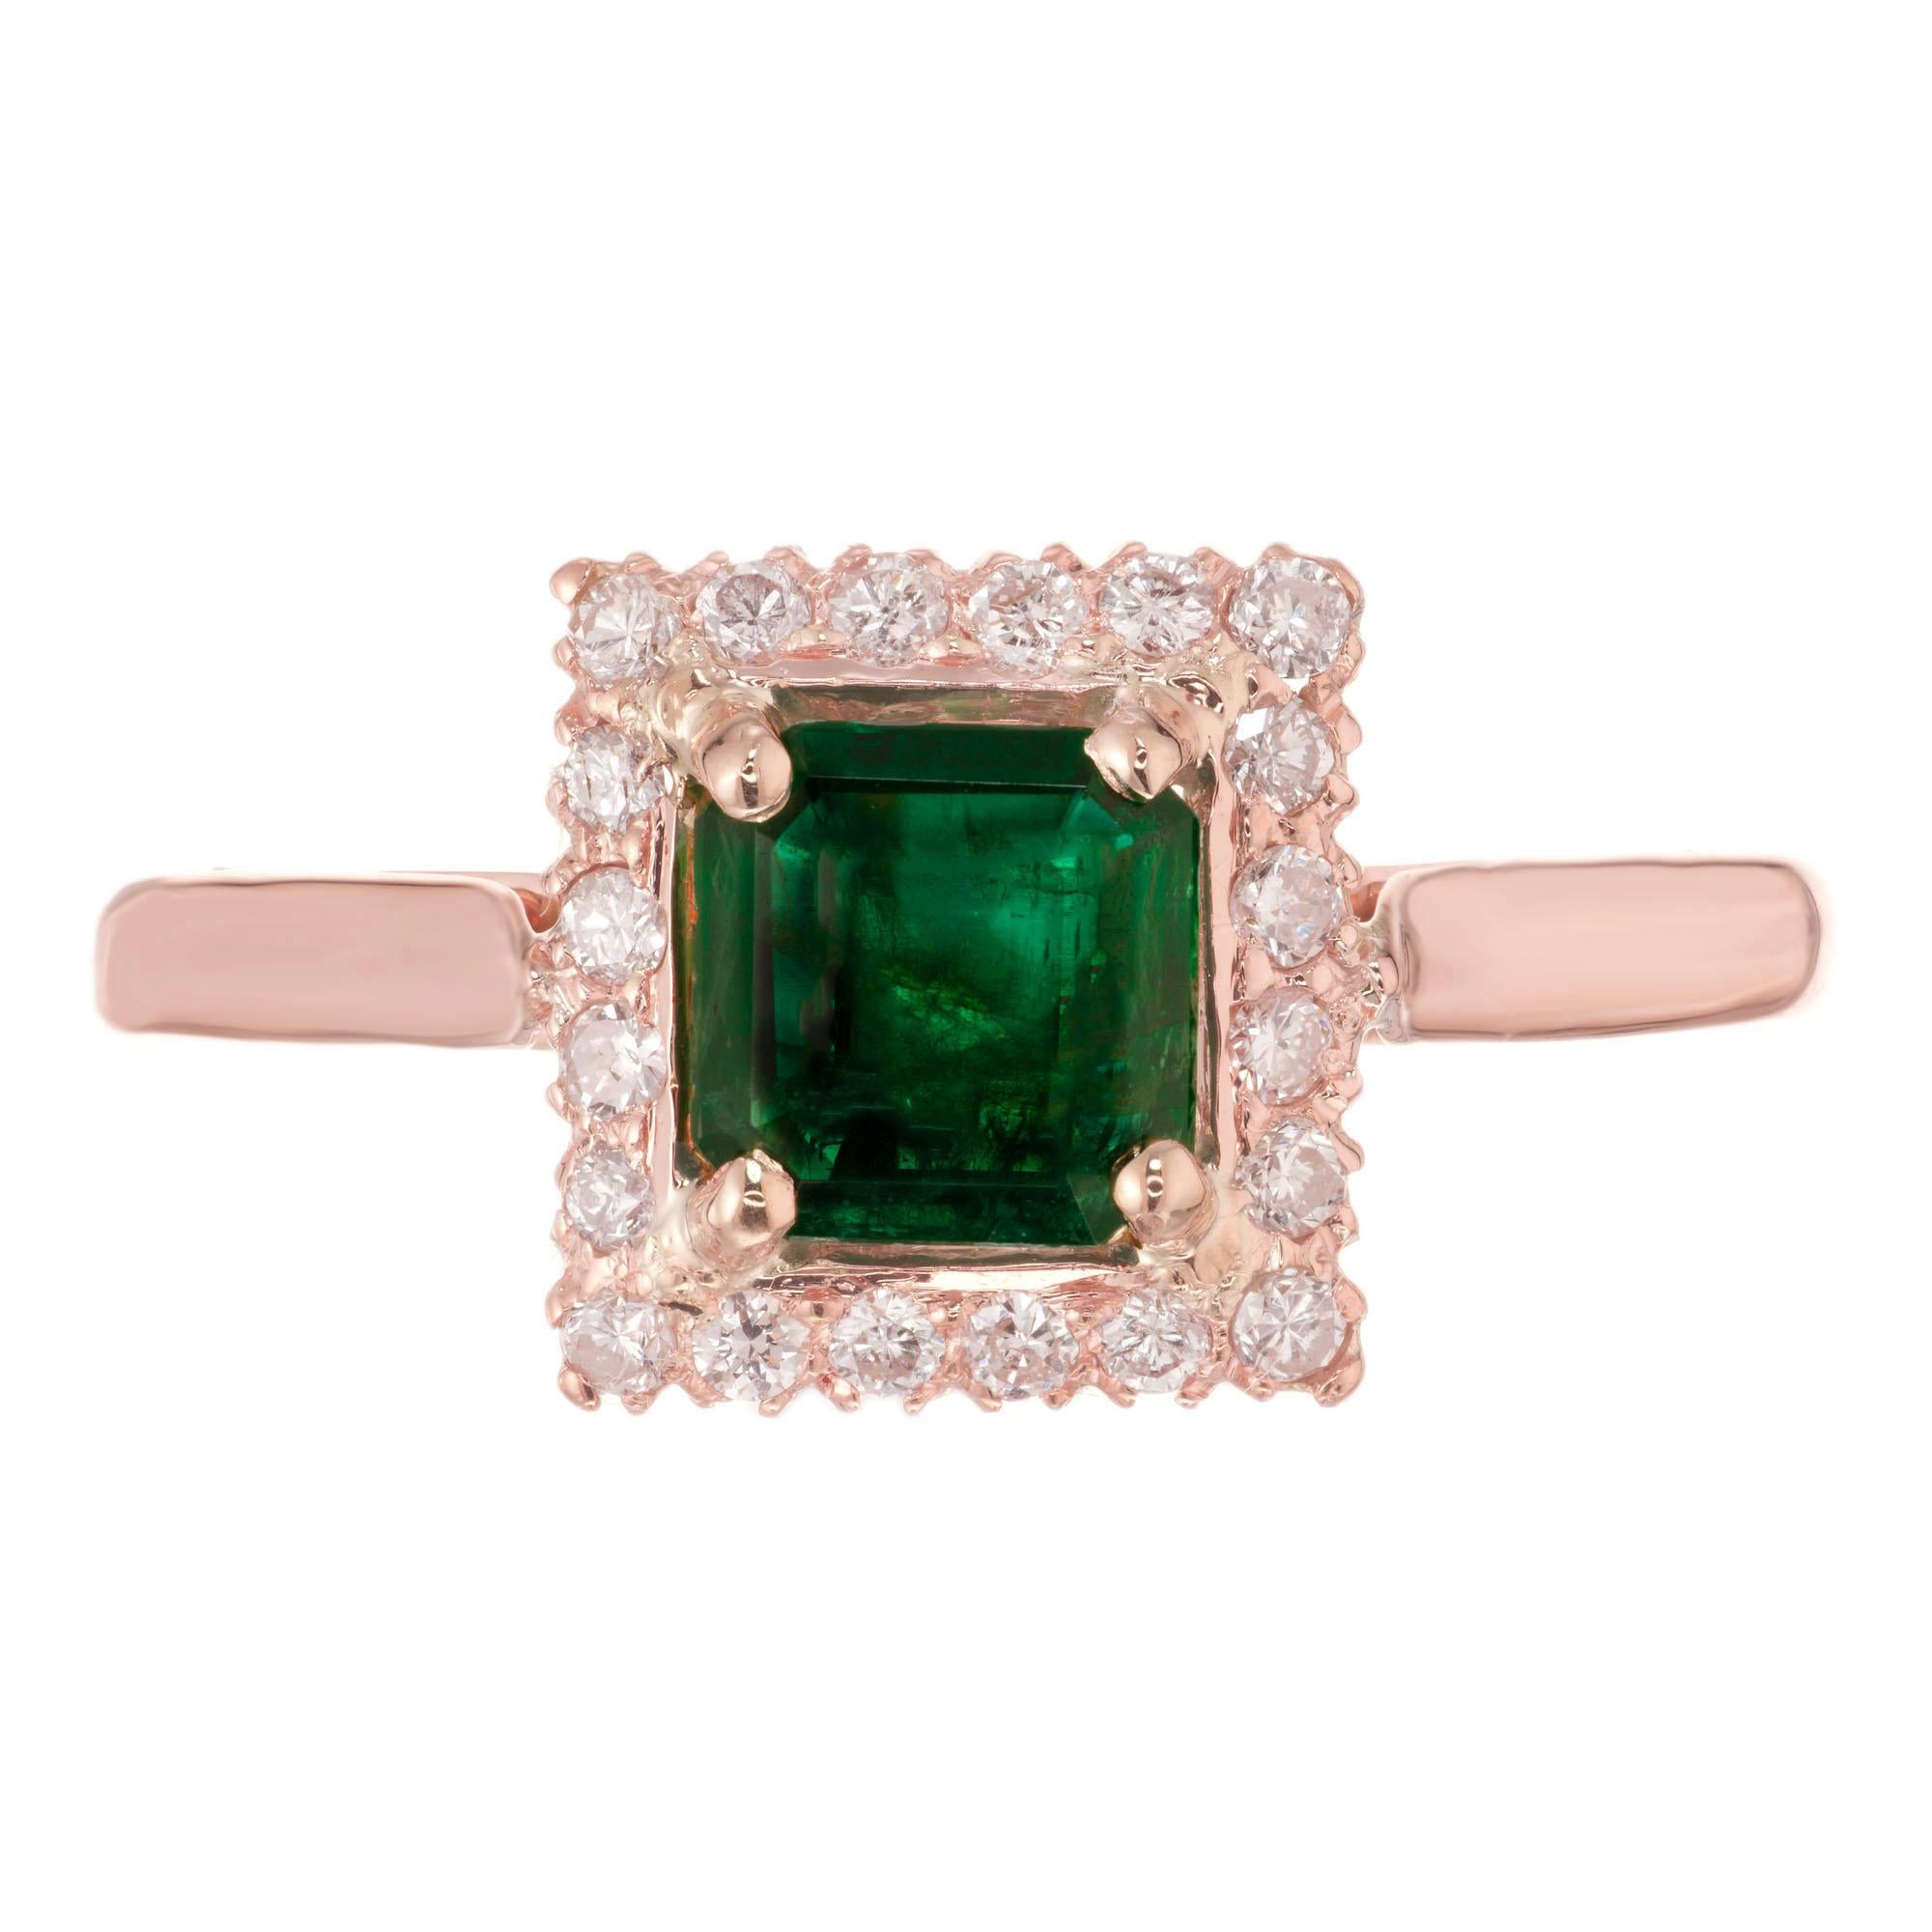 Emerald and diamond engagement ring. GIA certified octagonal emerald center stone set in a 14k rose gold setting with 20 round cut diamond halo. 

1 octagonal .67cts emerald.  GIA certificate 2213095453
20 round cut diamonds, .20cts  G, SI
Size: